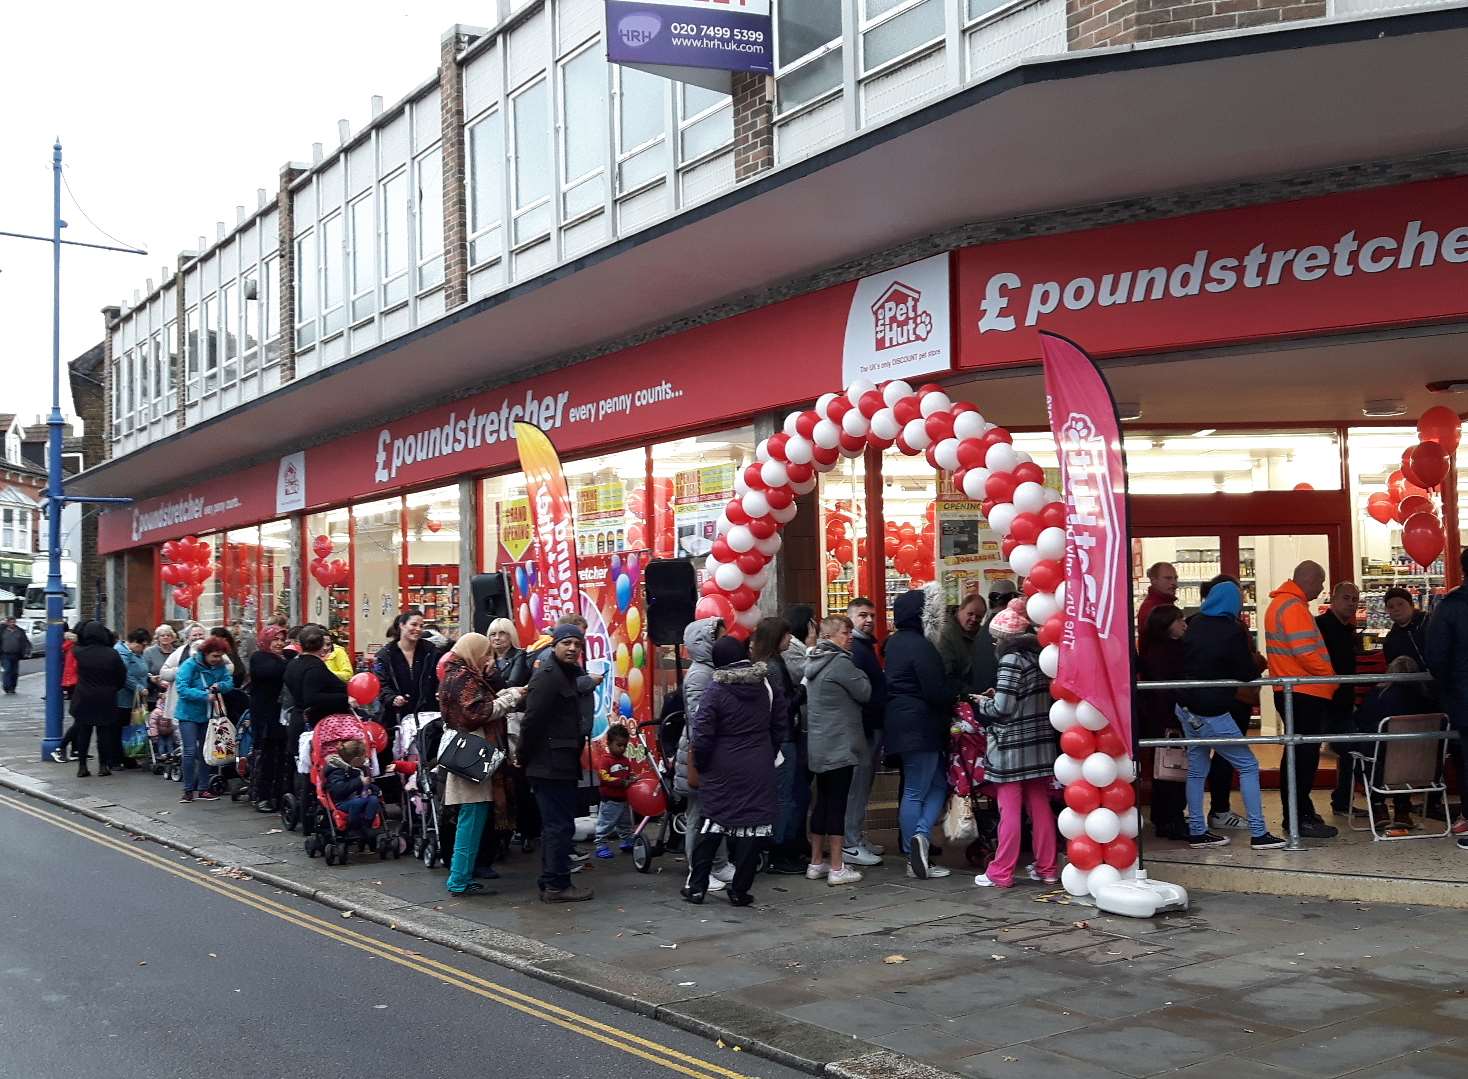 Queues were forming from 9am outside Poundstretcher's new store in Sheerness